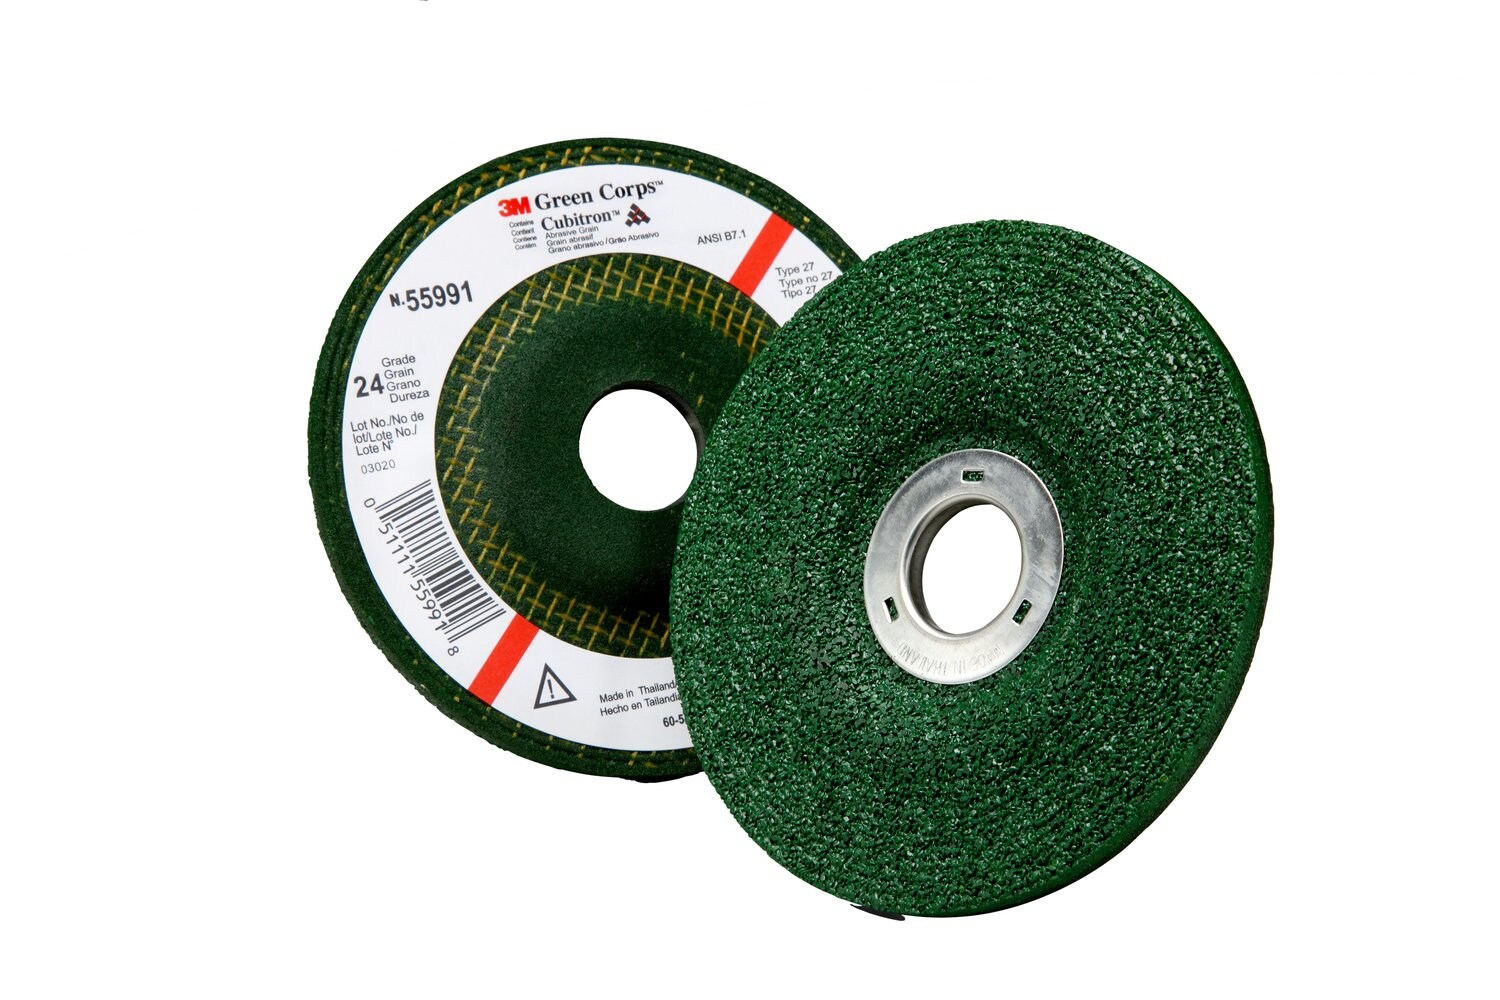 7000044994 - 3M Green Corps Depressed Center Grinding Wheel, 24 4-1/2 in x 1/4 in x
7/8 in, 10/Carton, 40 ea/Case